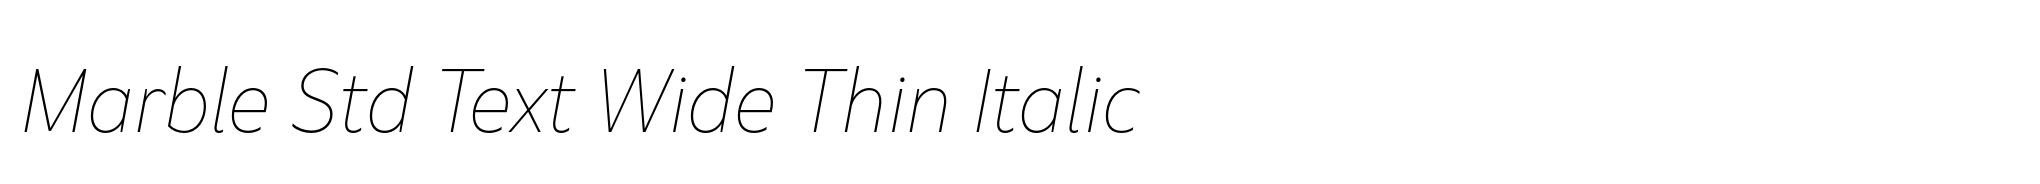 Marble Std Text Wide Thin Italic image